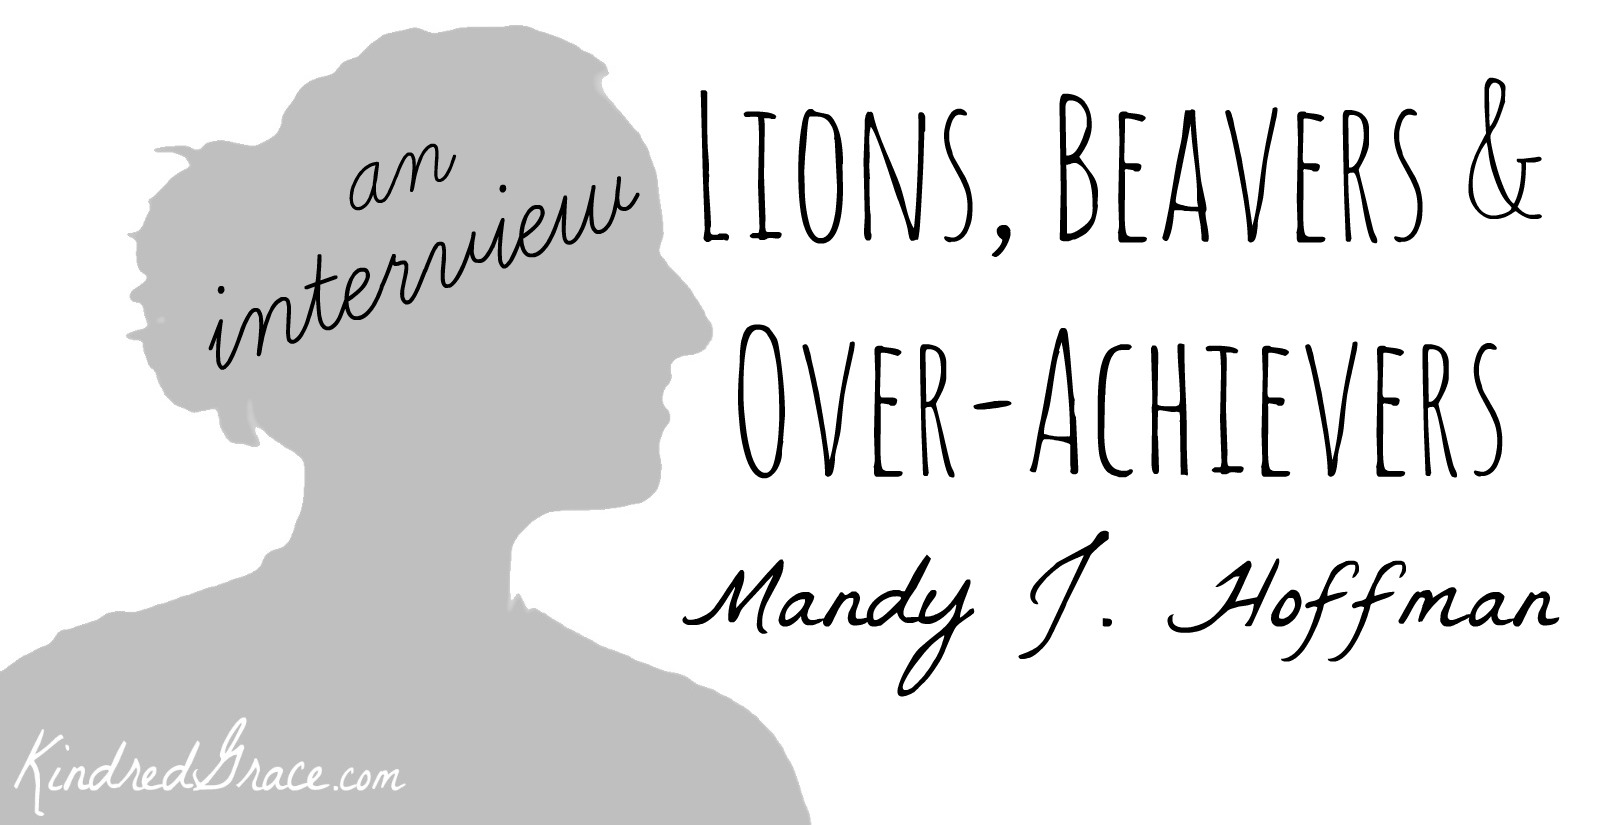 lions, beavers and over-achievers (an interview with Mandy Hoffman)